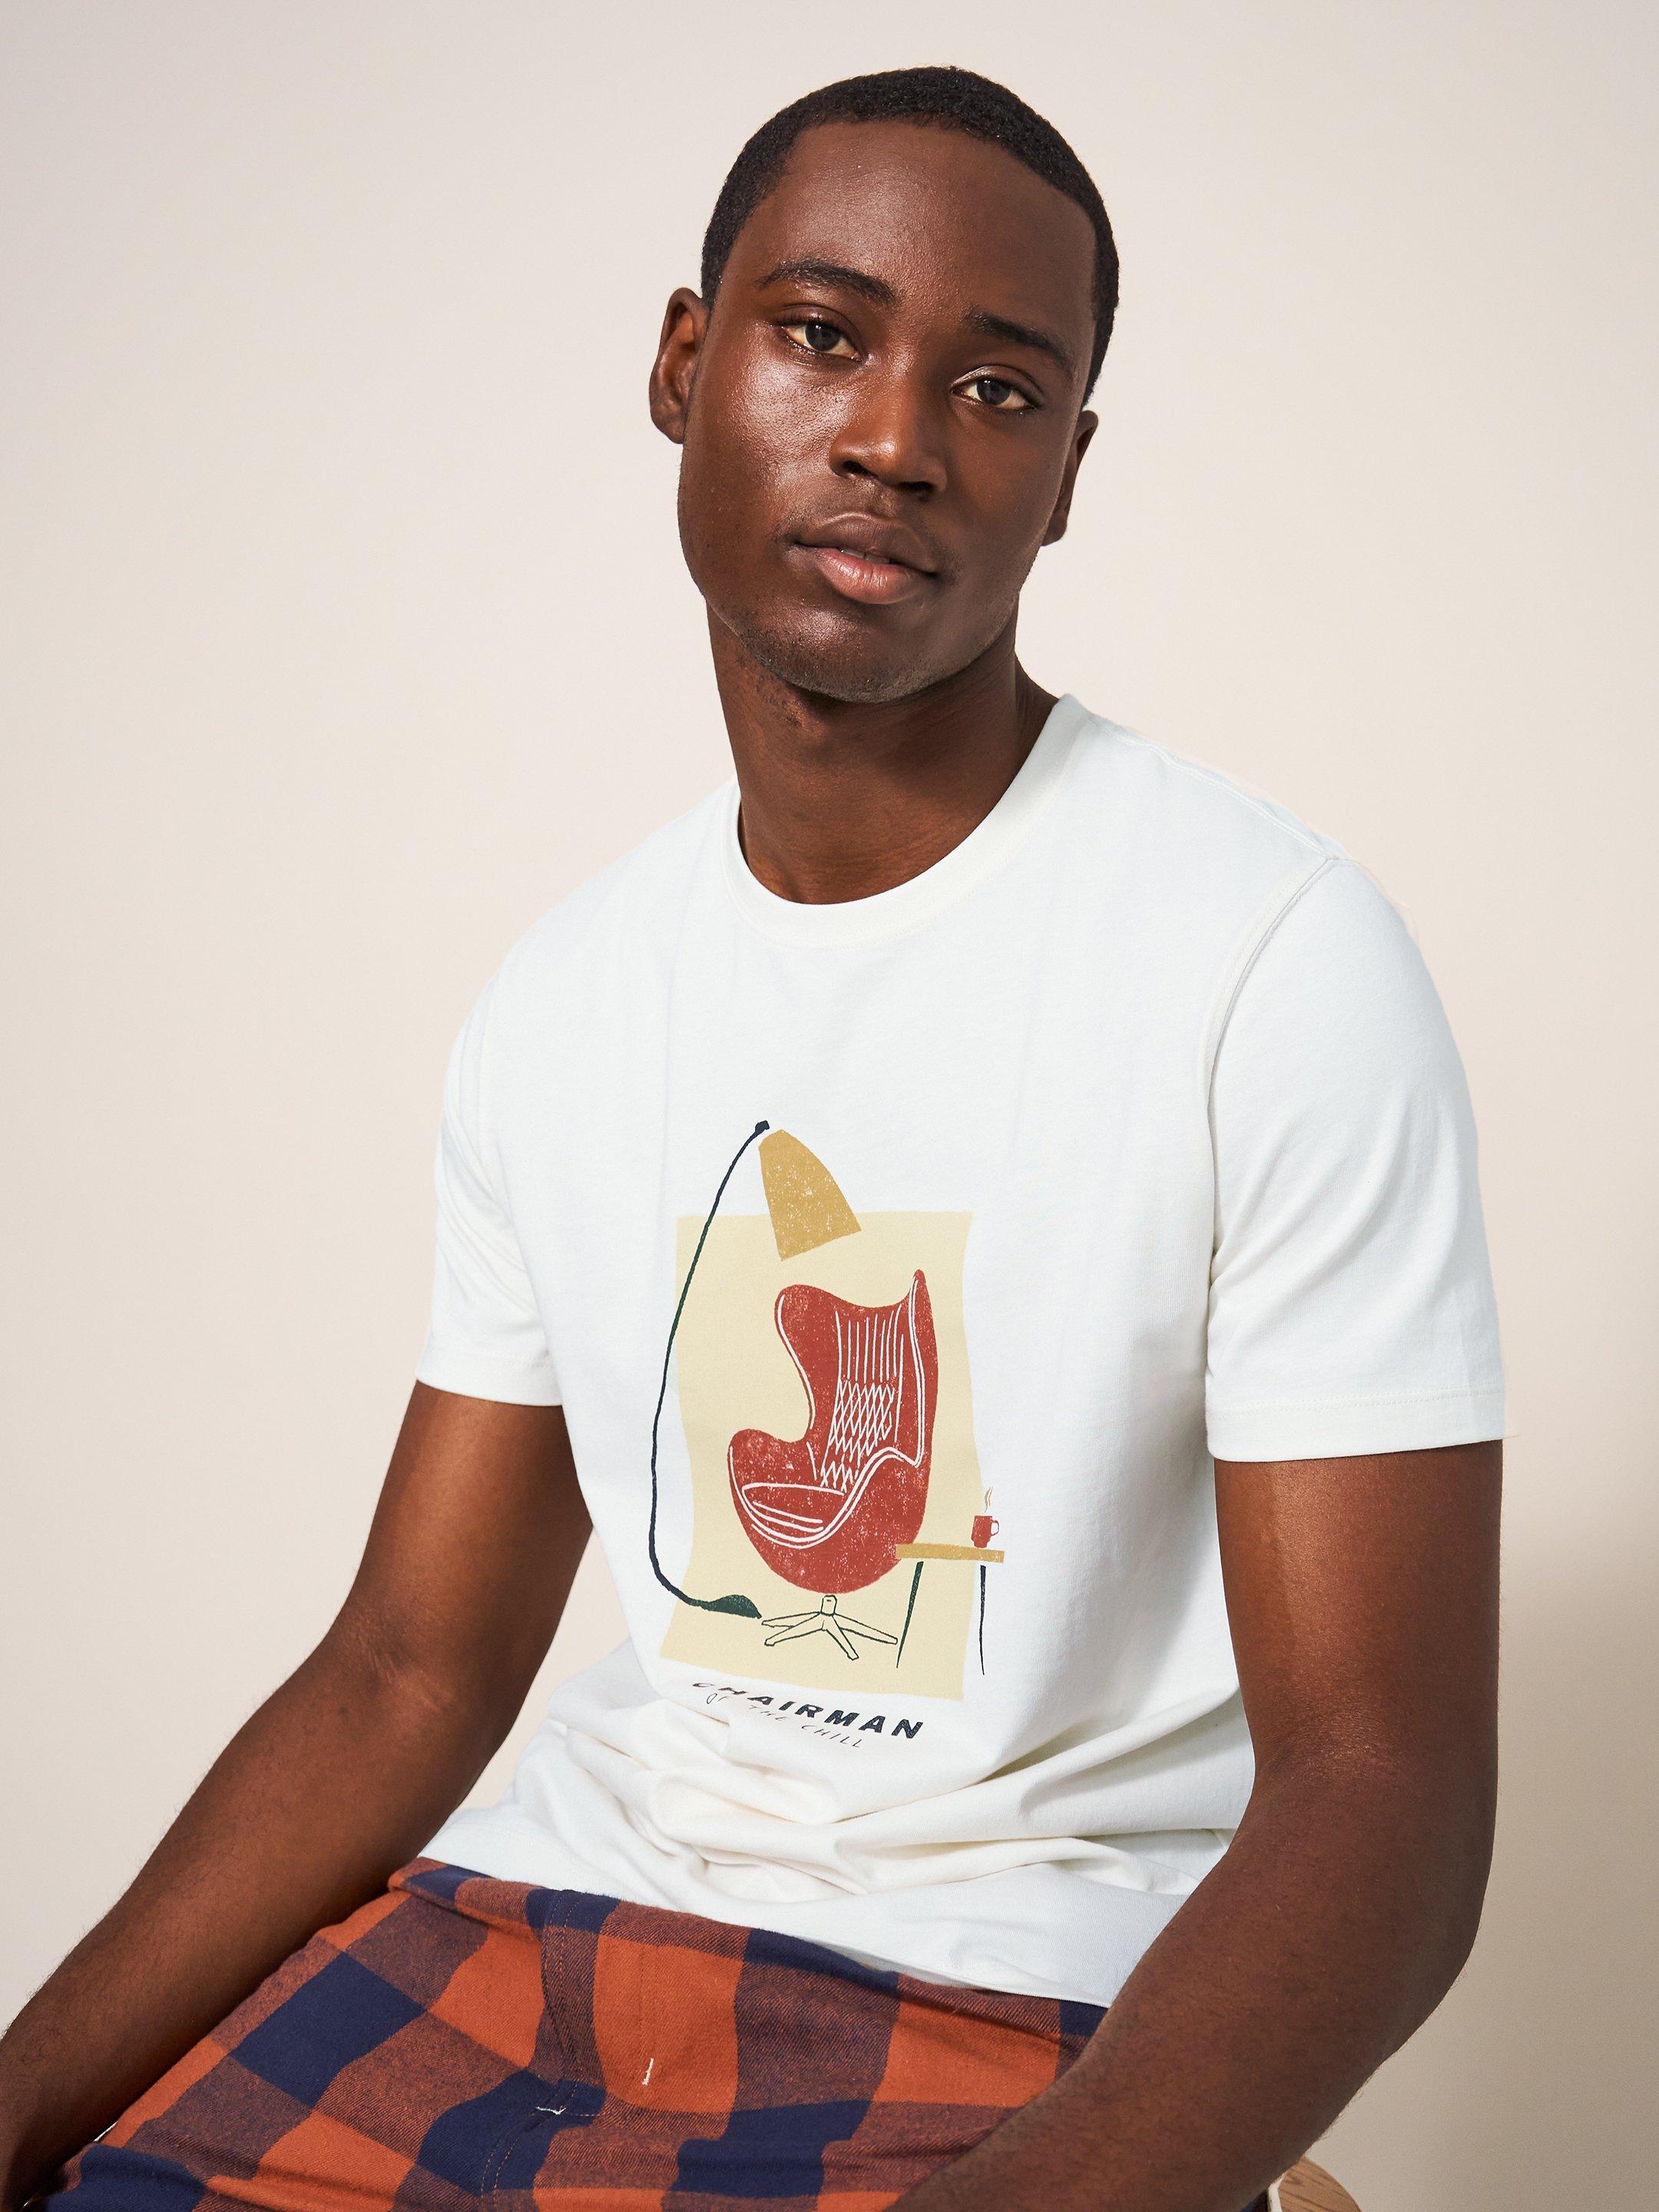 Chairman Graphic Tee in NAT WHITE - LIFESTYLE